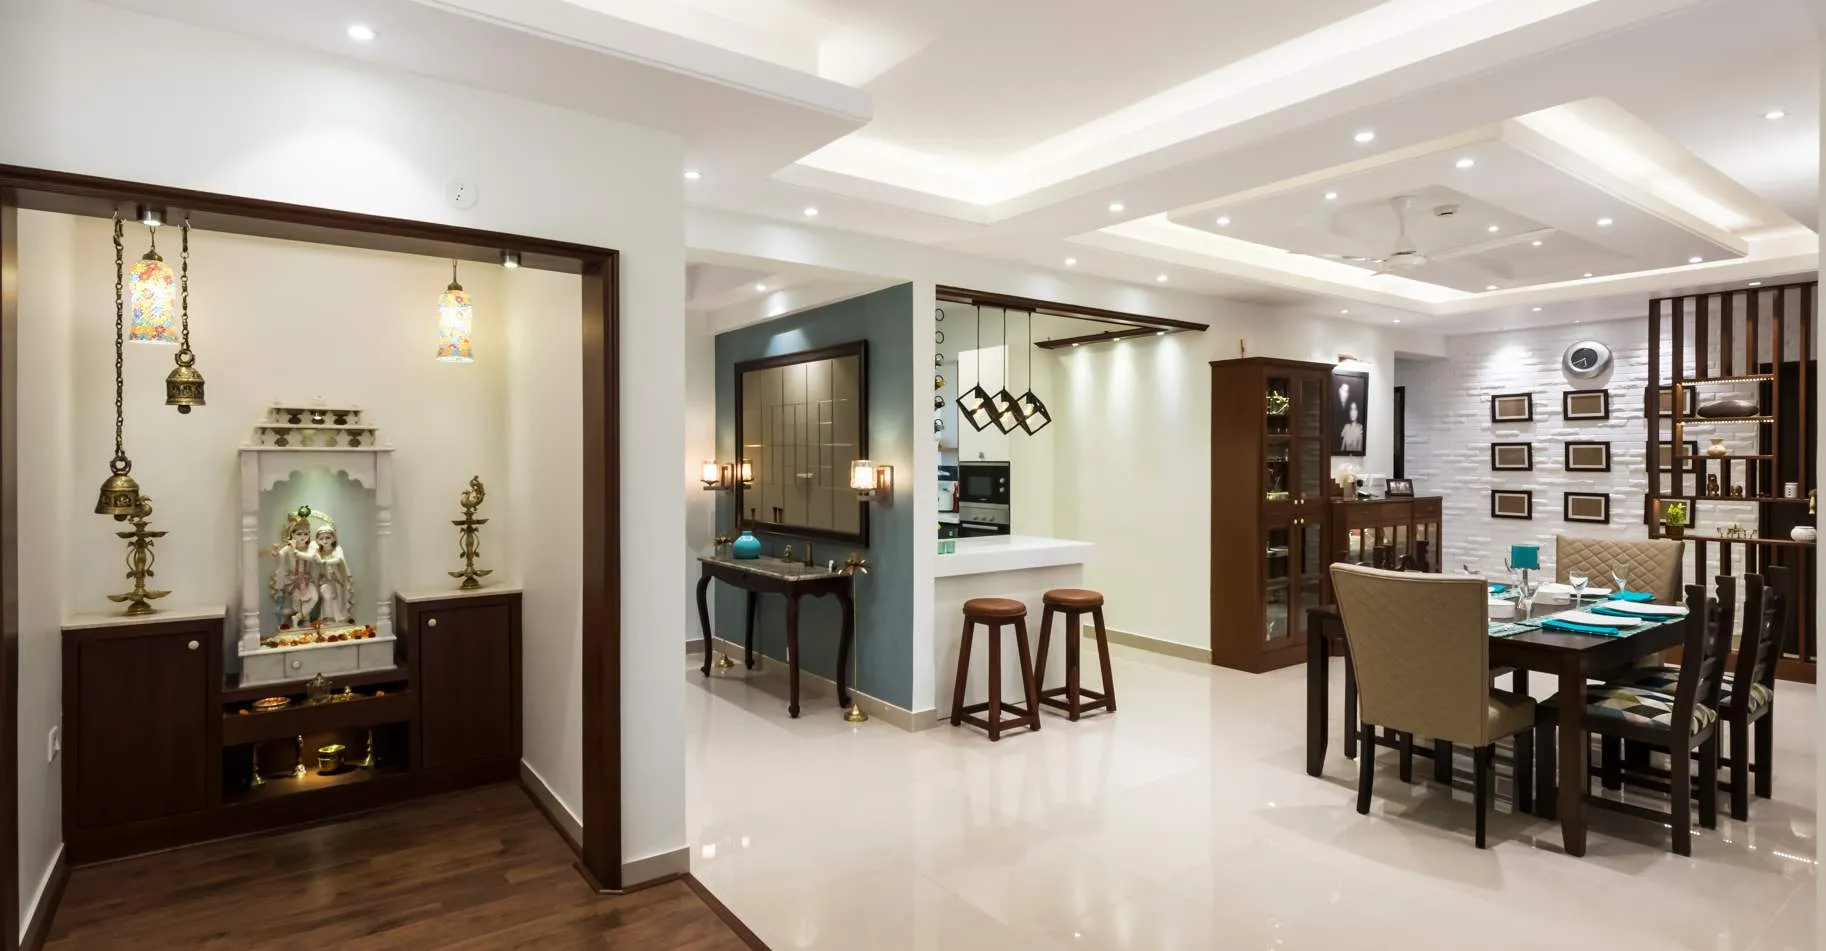 white home interiors with a pooja room, dining rom and kitchen with dining table, chairs, pendant lights and ceiling lights